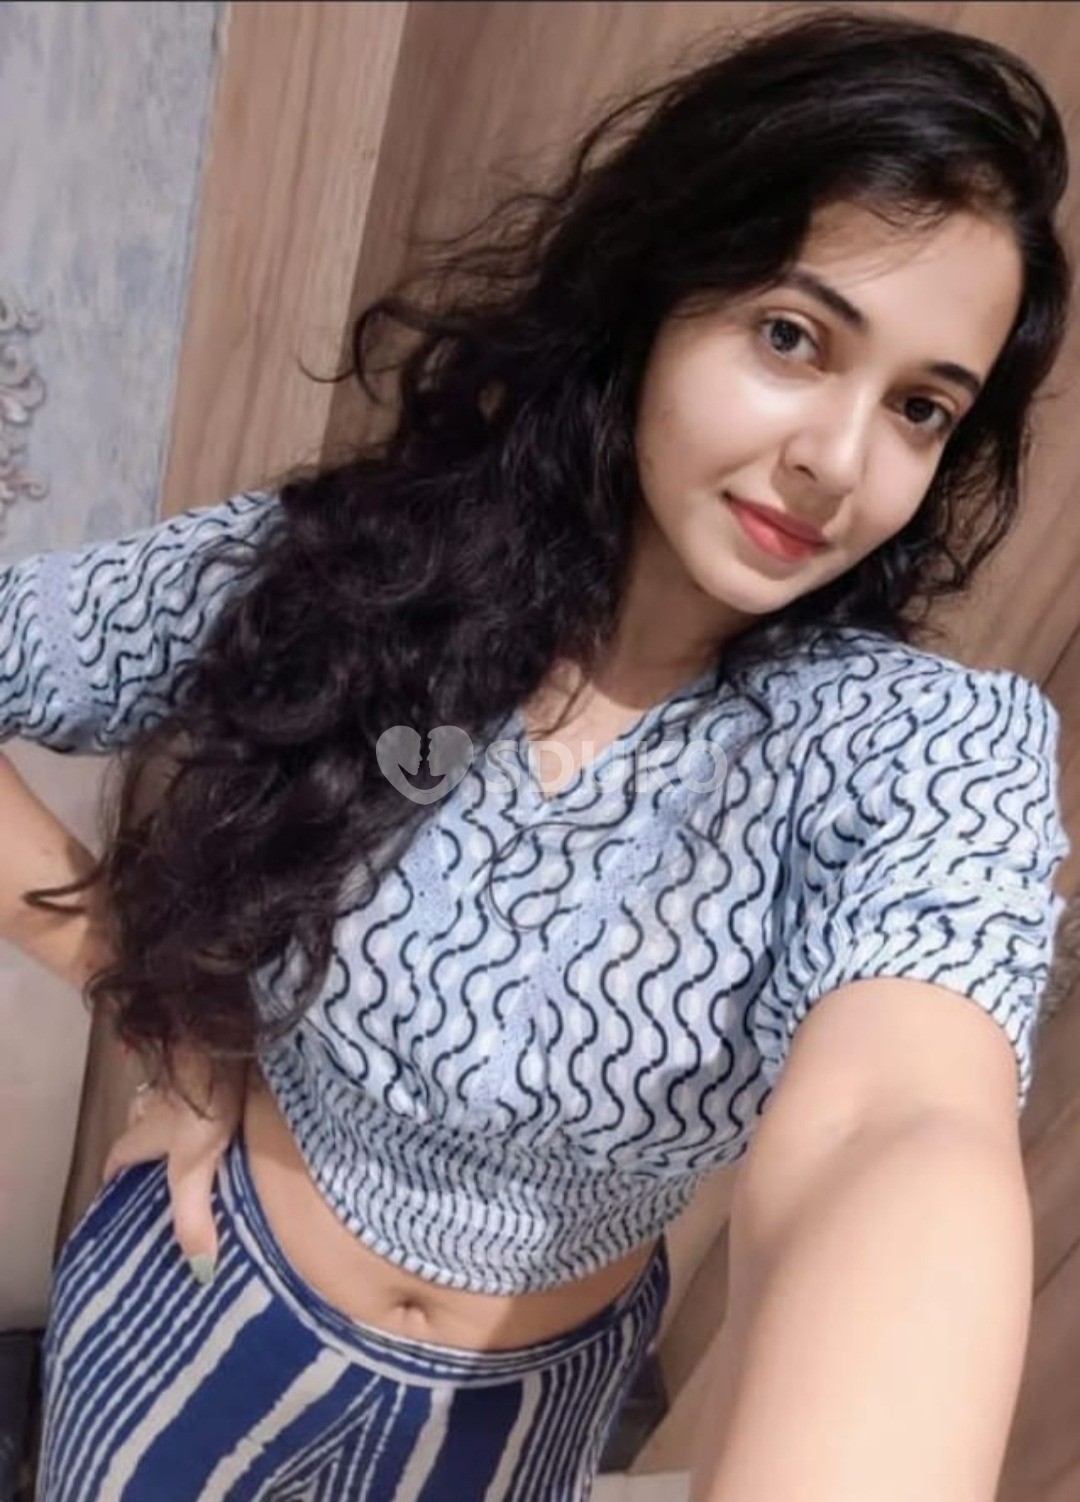 Srinagar LOW PRICE🔸✅ SERVICE A AVAILABLE 100% SAFE AND S SECURE UNLIMITED ENJOY HOT COLLEGE GIRL HOUSEWIFE Ab UNT